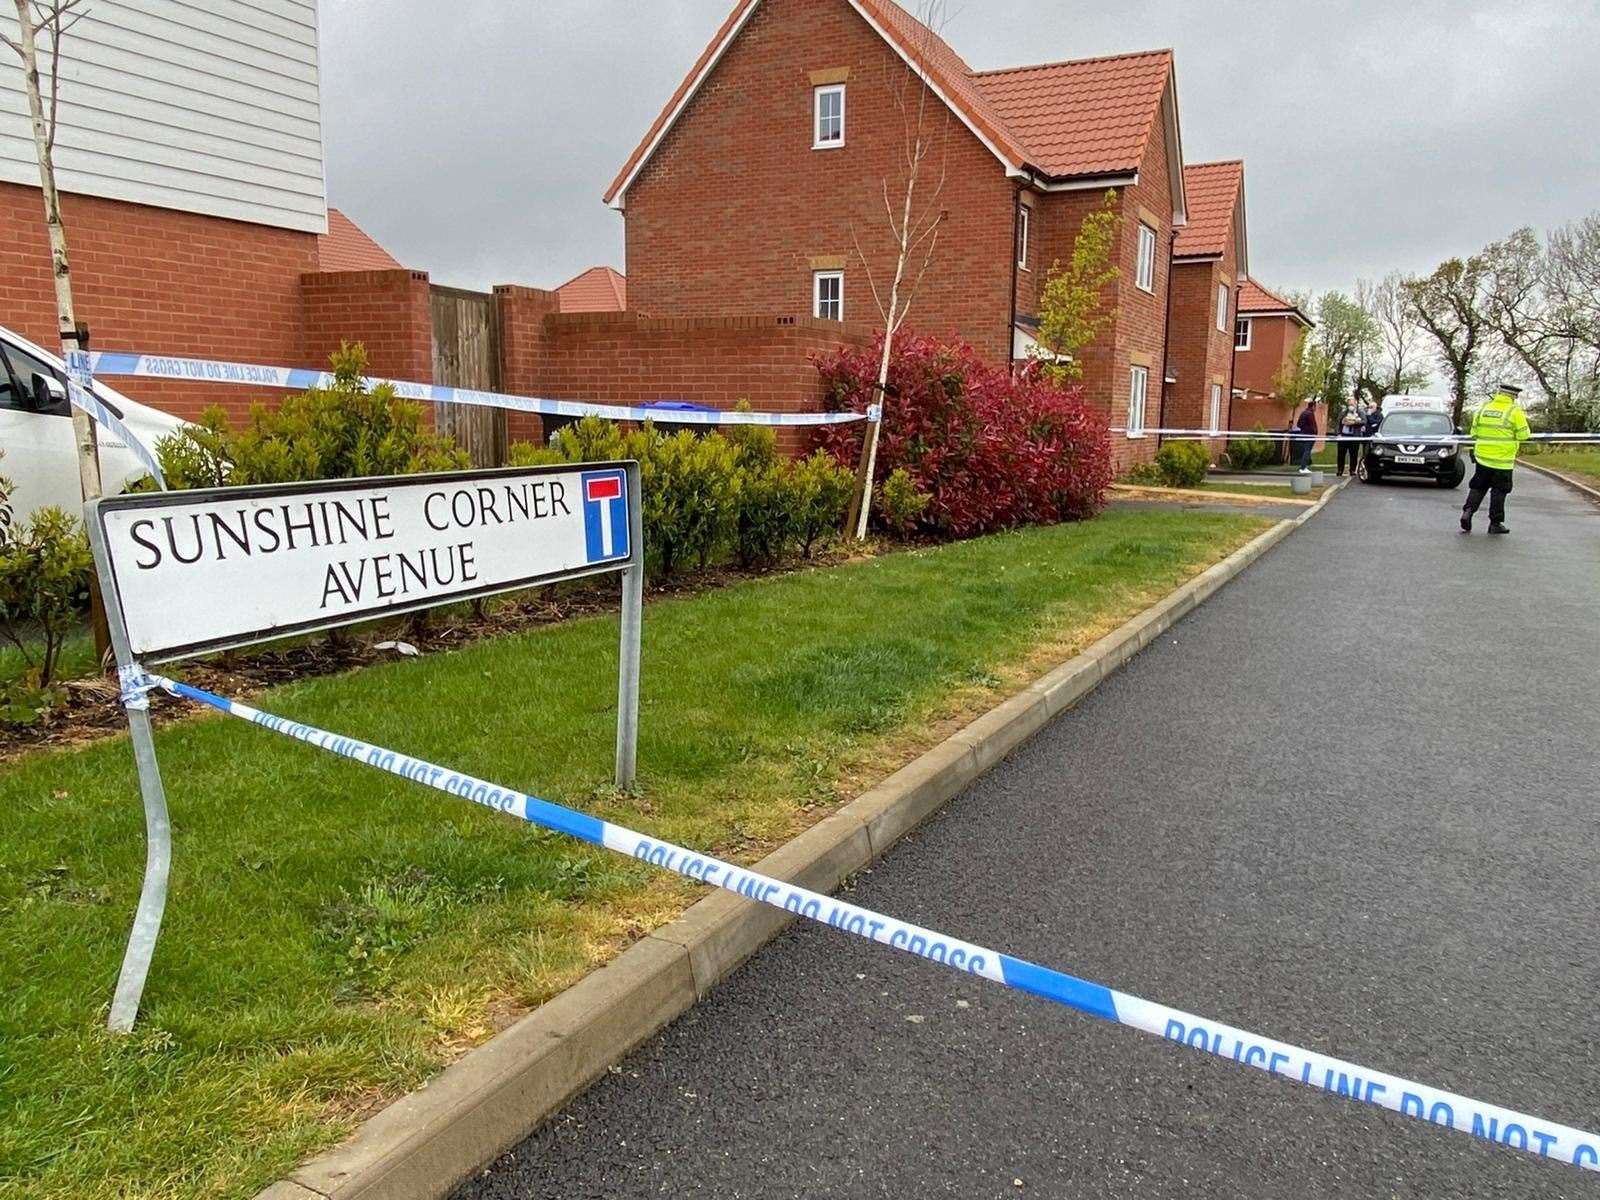 Police and forensics teams search a property in Aylesham in connection with the murder probe